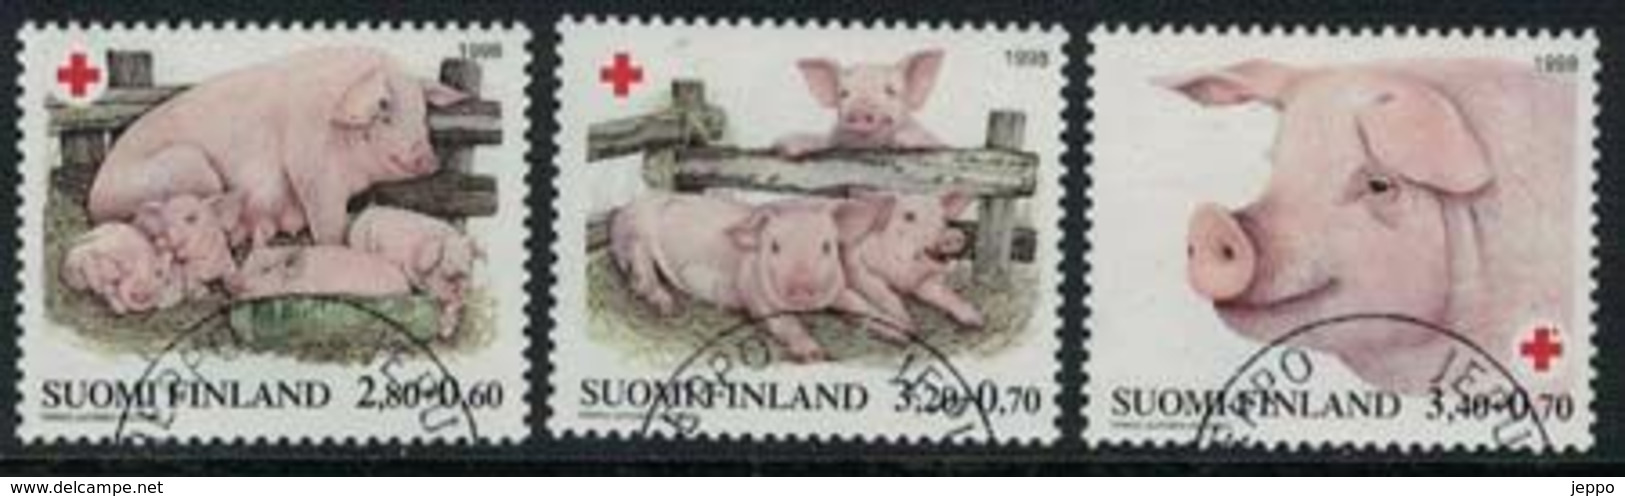 1998 Finland Red Cross Animals, Pigs Complete Used Set. - Used Stamps